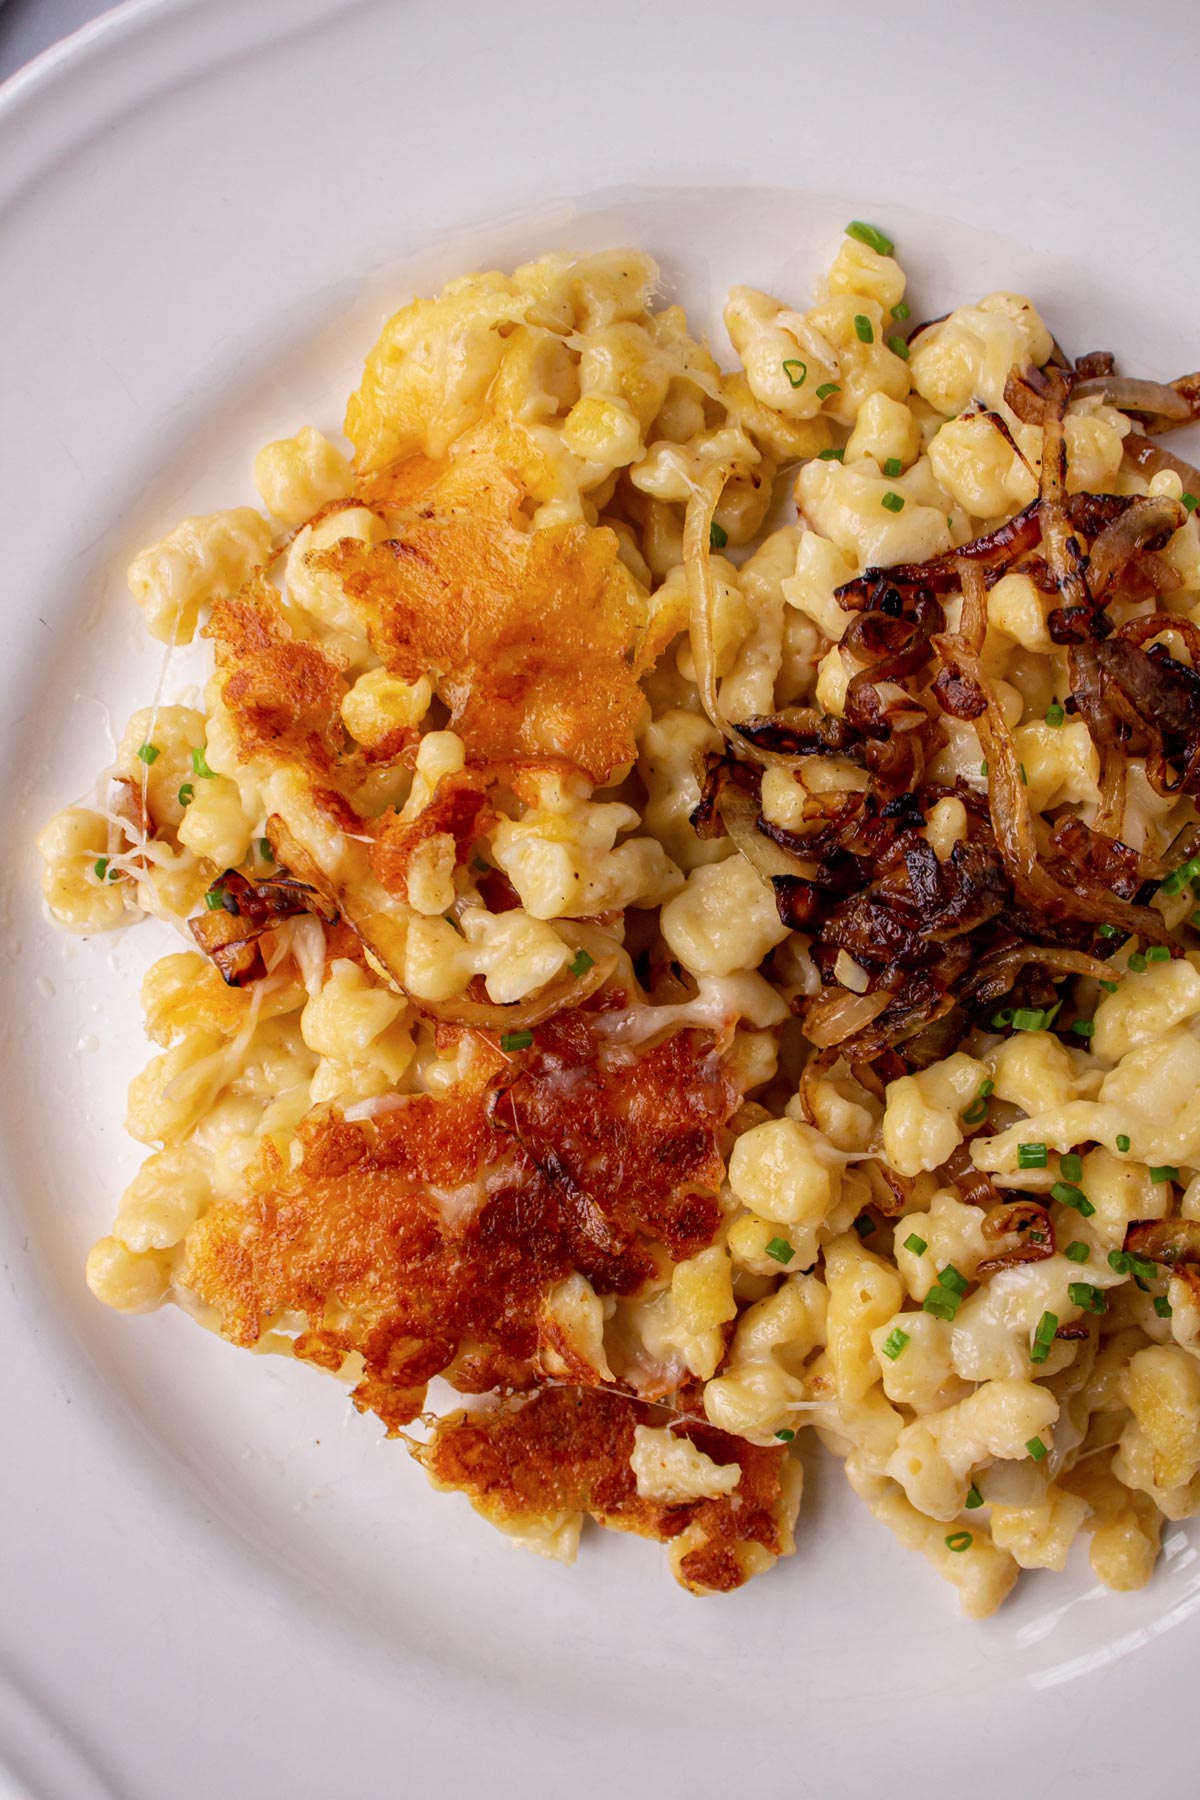 Closeup of a plate of kasnocken cheesy spaetzle showing off the crispy browned bottom crust.